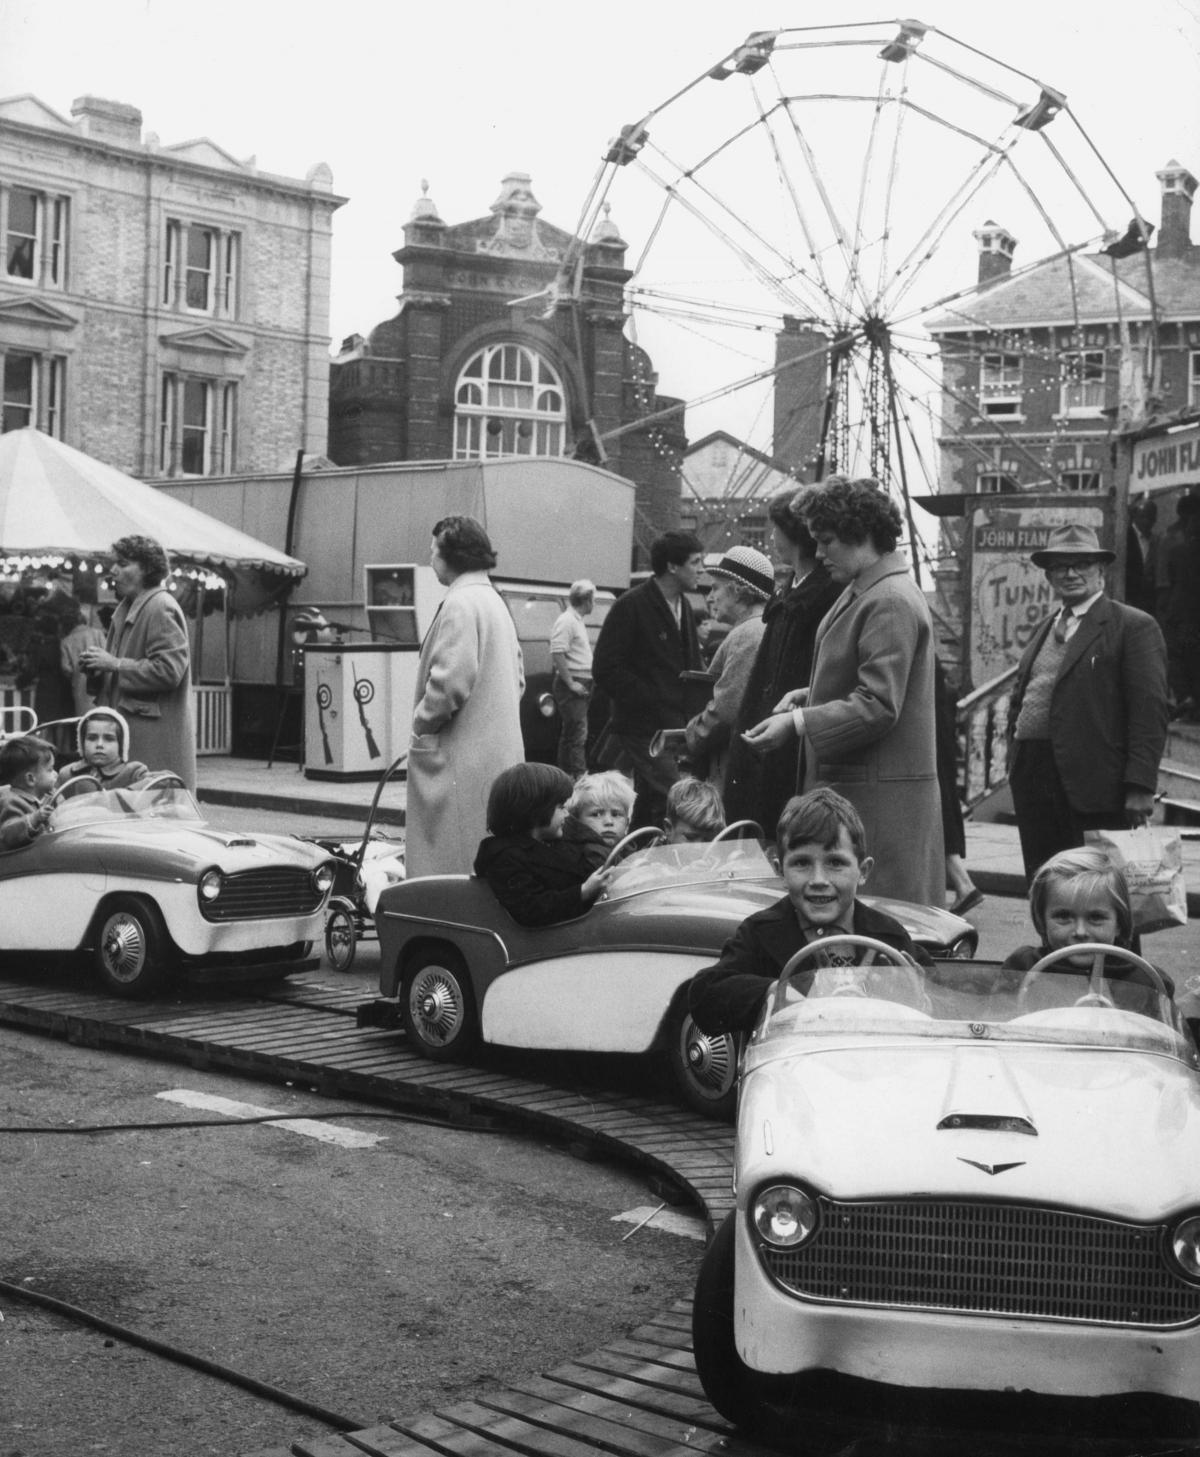 Children try their hand at driving at the Abingdon town fair in 1963.